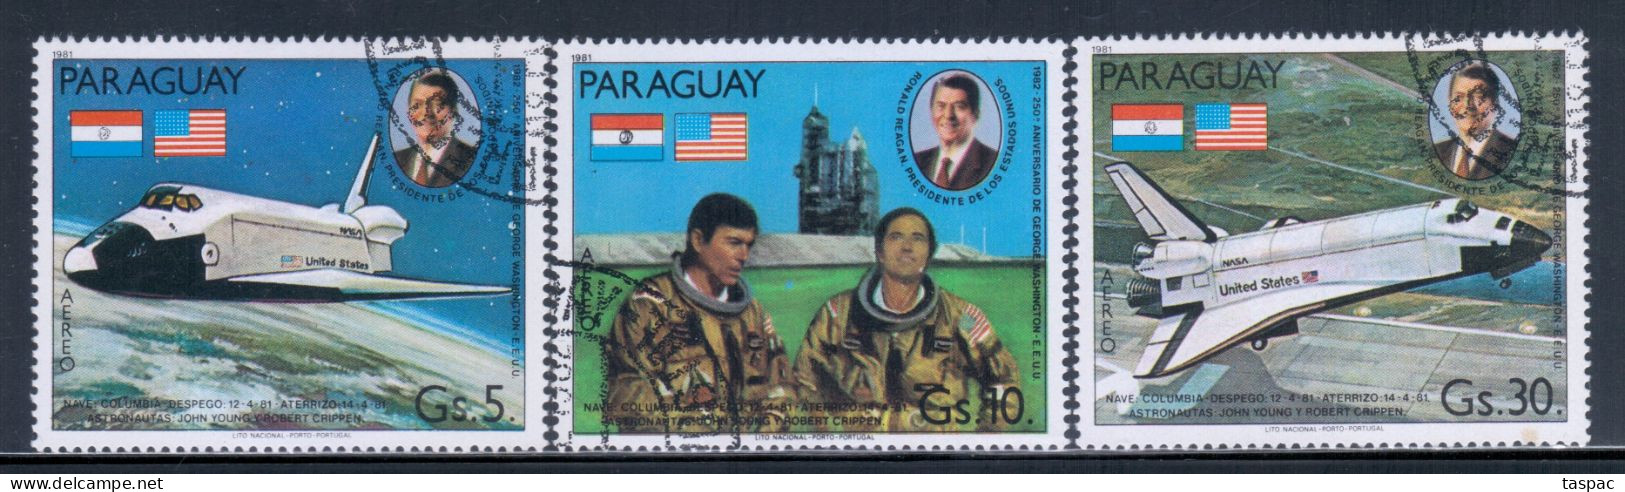 Paraguay 1981 Mi# 3420-3422 Used - First Space Shuttle Mission - Paraguay